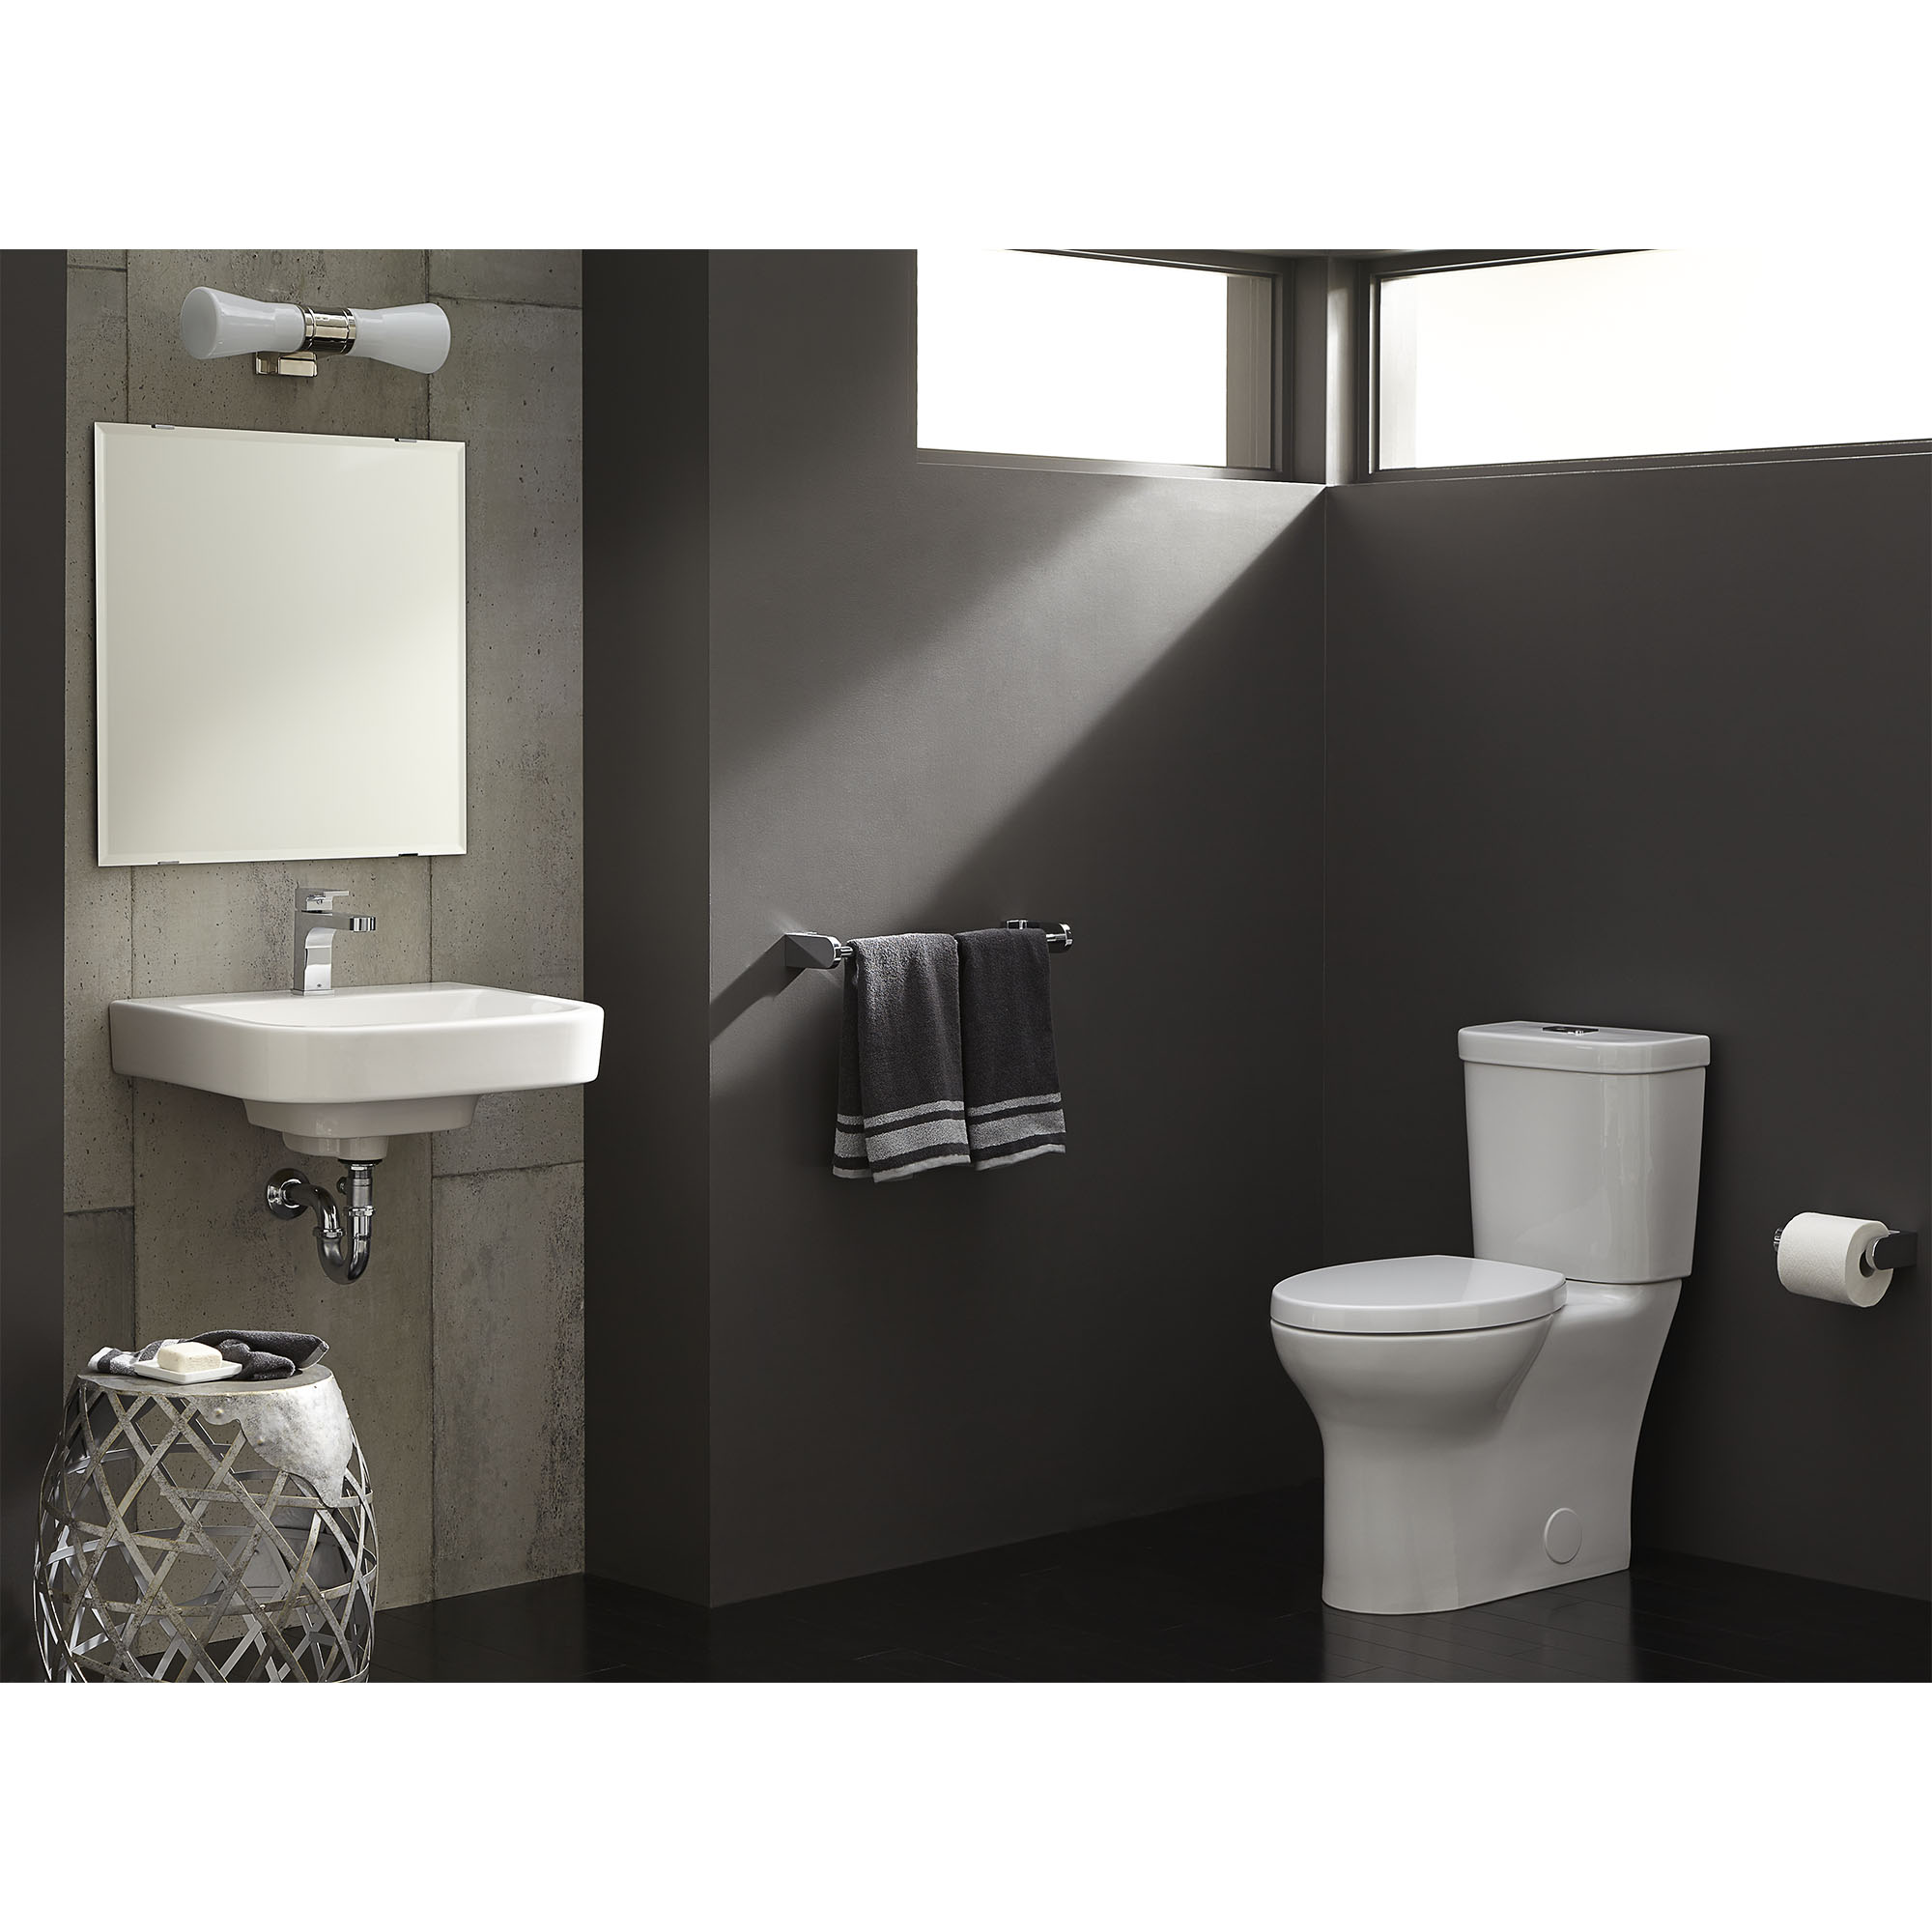 Equility® Two-Piece Dual Flush Chair-Height Elongated Toilet with Seat